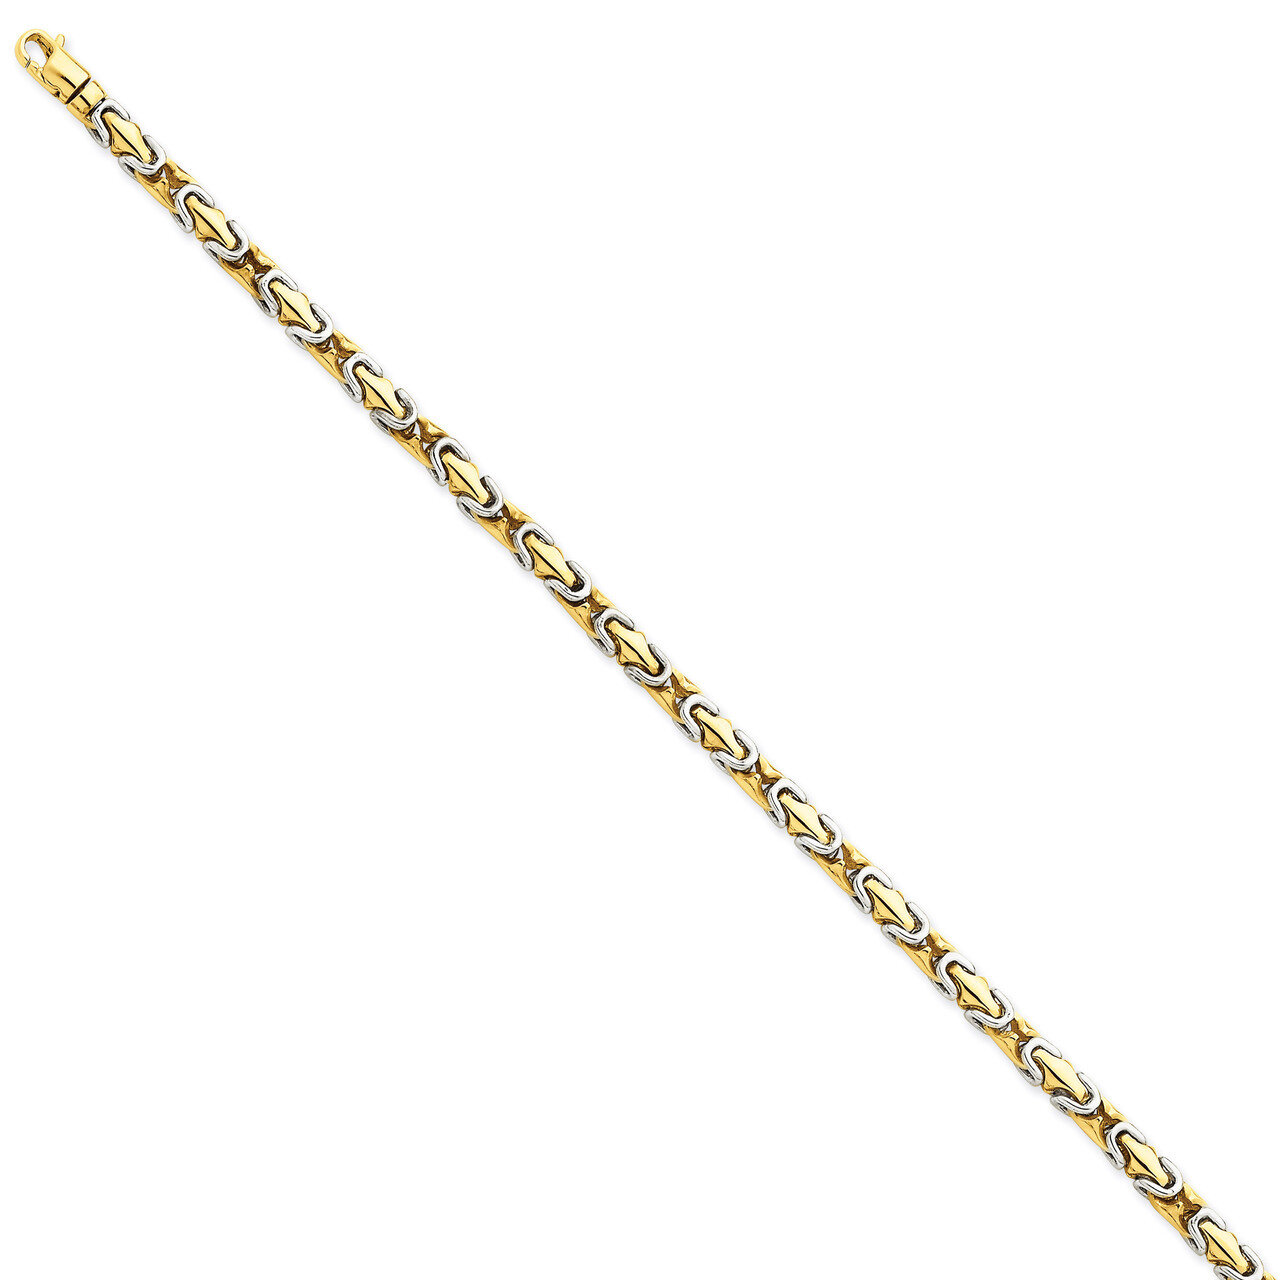 4.1mm Polished Fancy Link Chain 24 Inch 14k Two-Tone Gold LK571-24